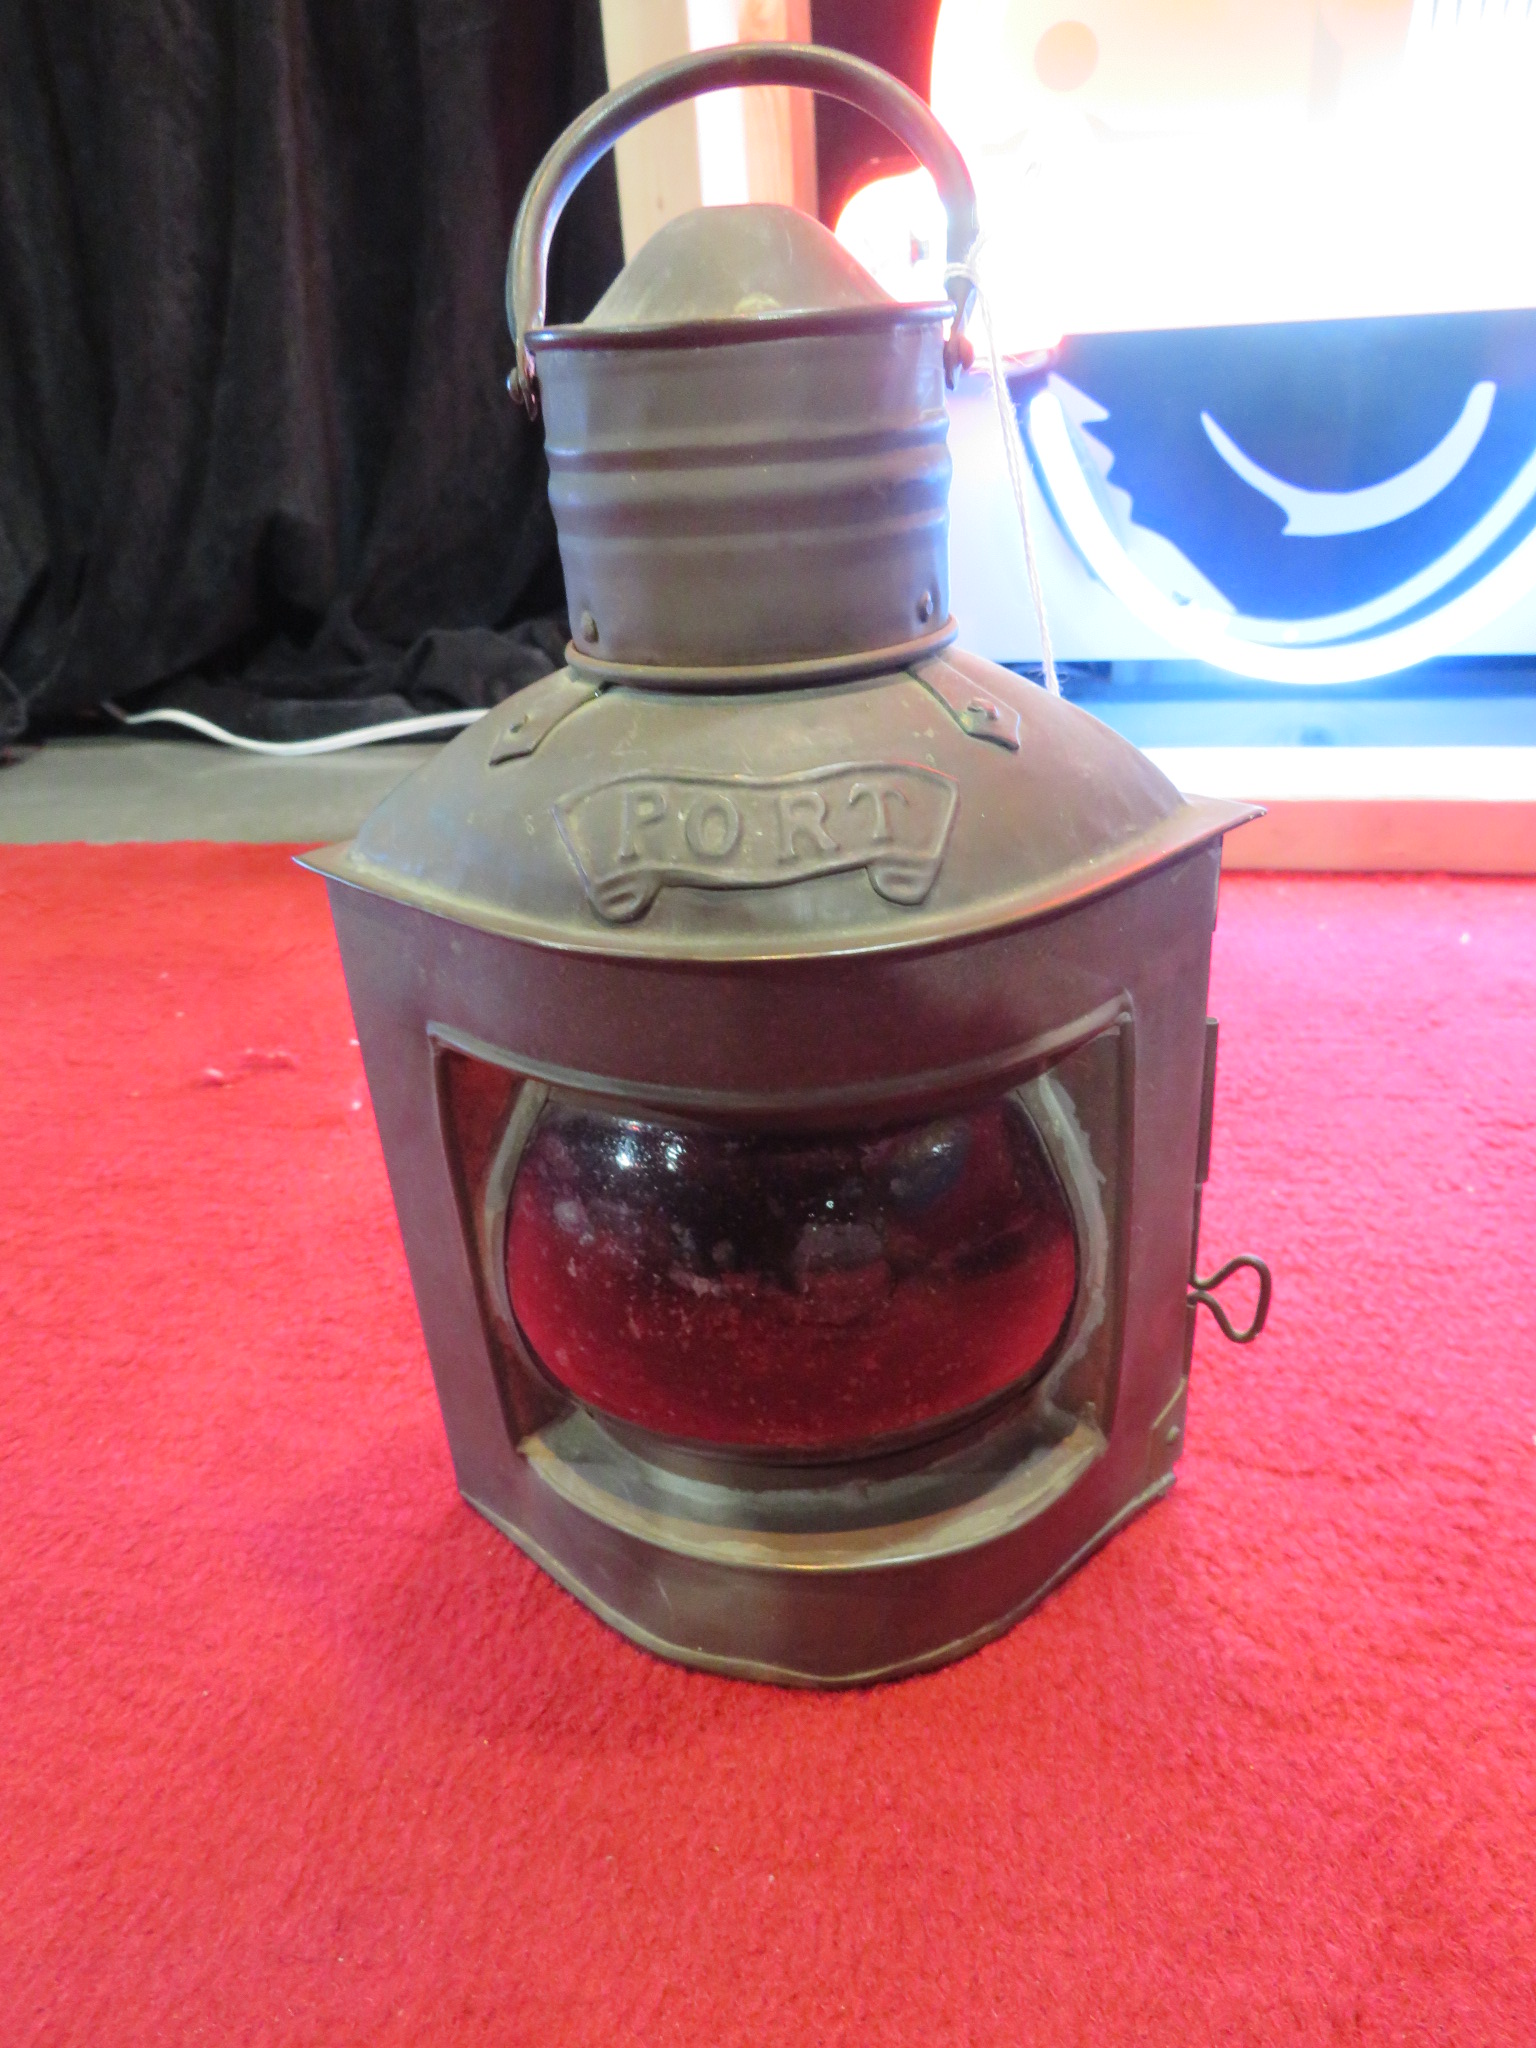 0th Image of a N/A VINTAGE PORT LANTERN ORIGINAL LAMP AND REFLECTOR INSIDE